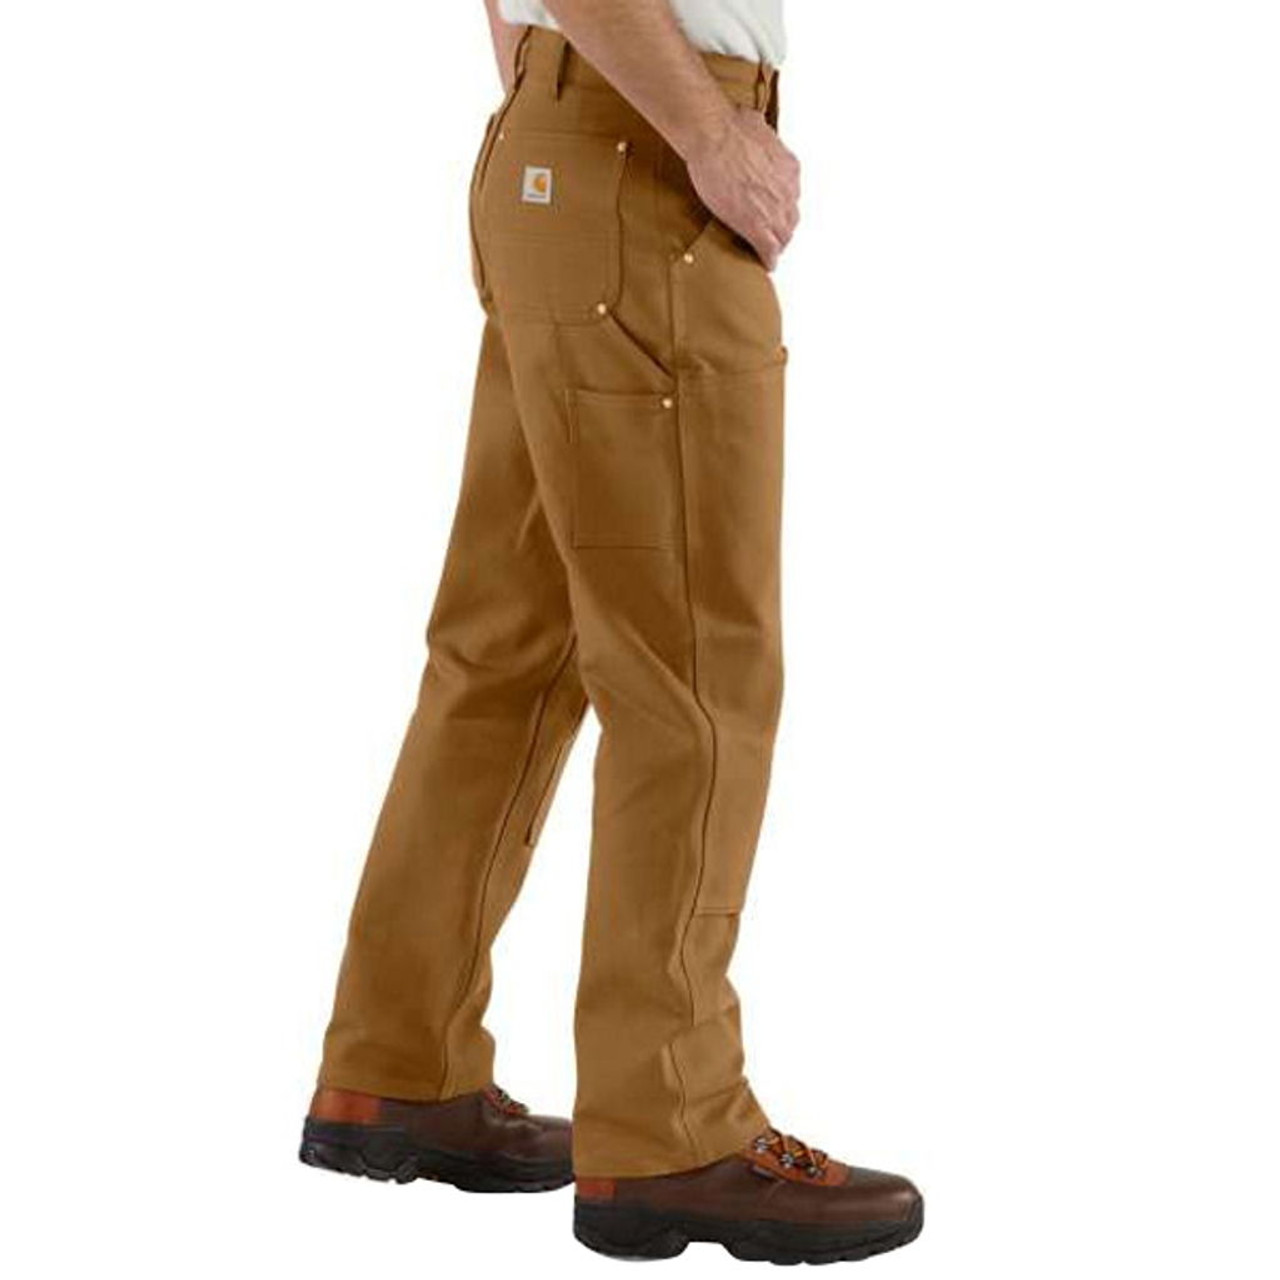 Carhartt Canvas Work Dungarees for Men - 36x32